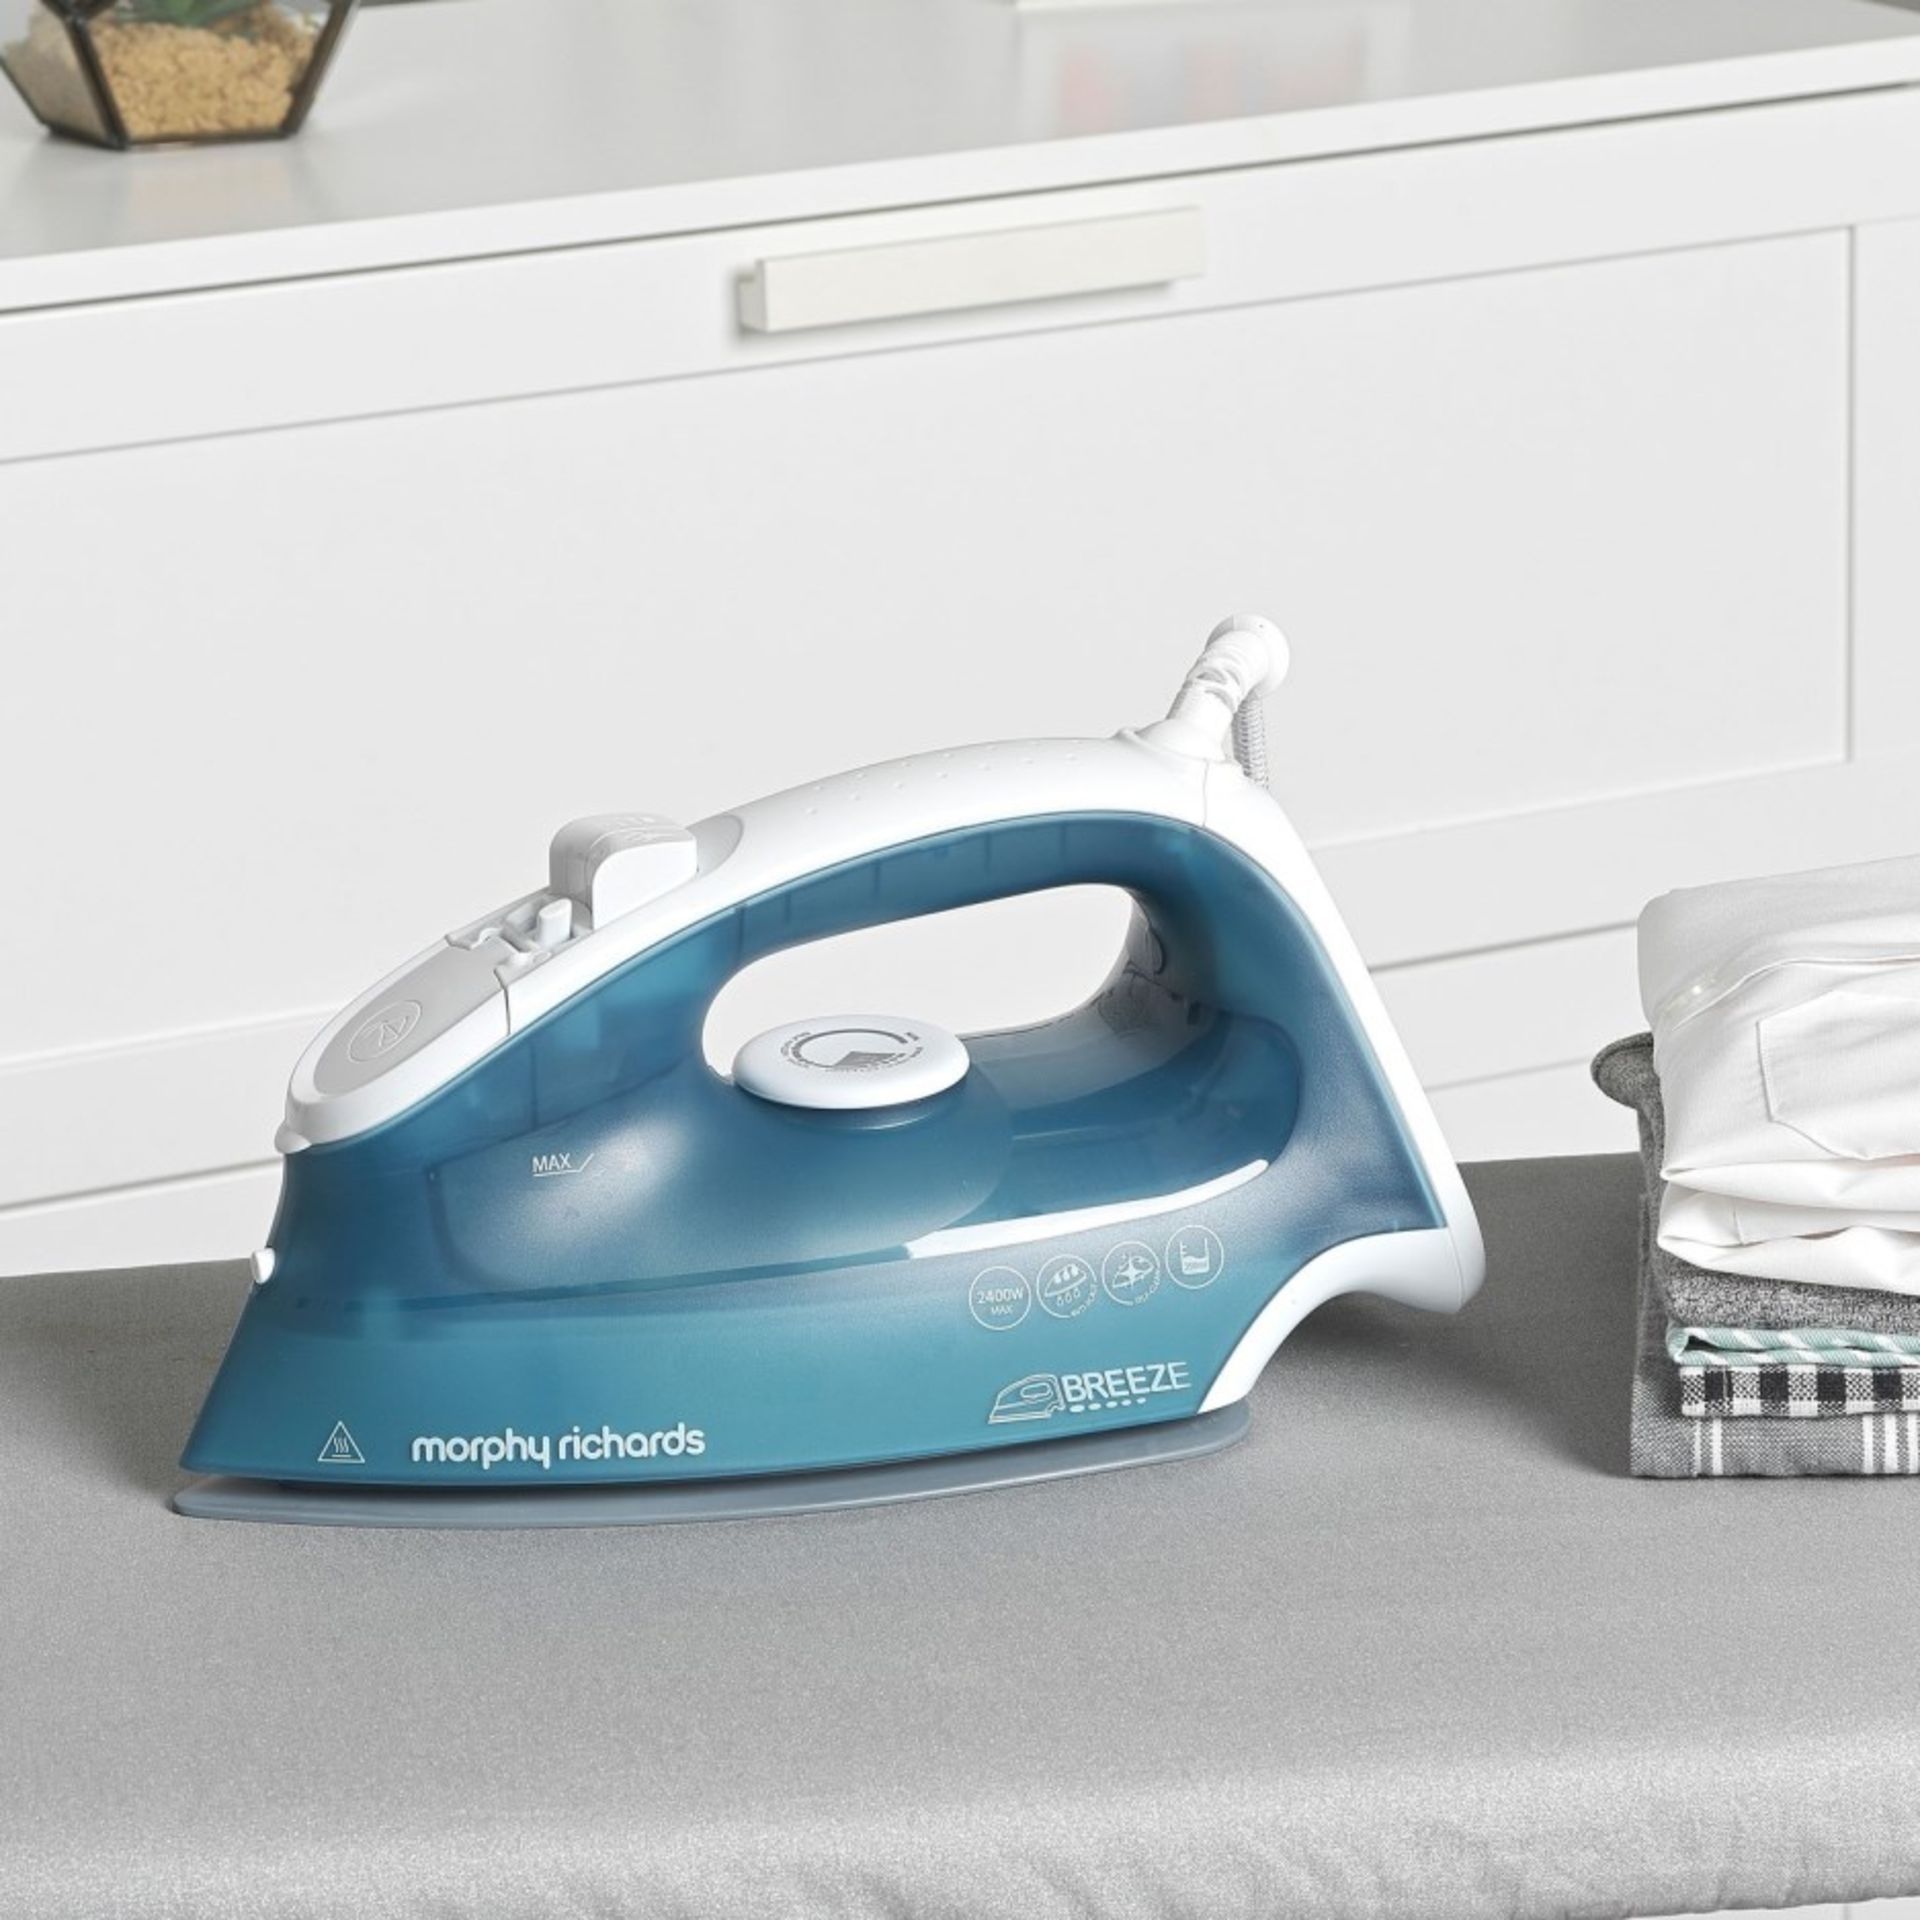 BRAND NEW MORPHY RICHARDS 2600W BLUE & WHITE STEAM IRON - RRP £22.